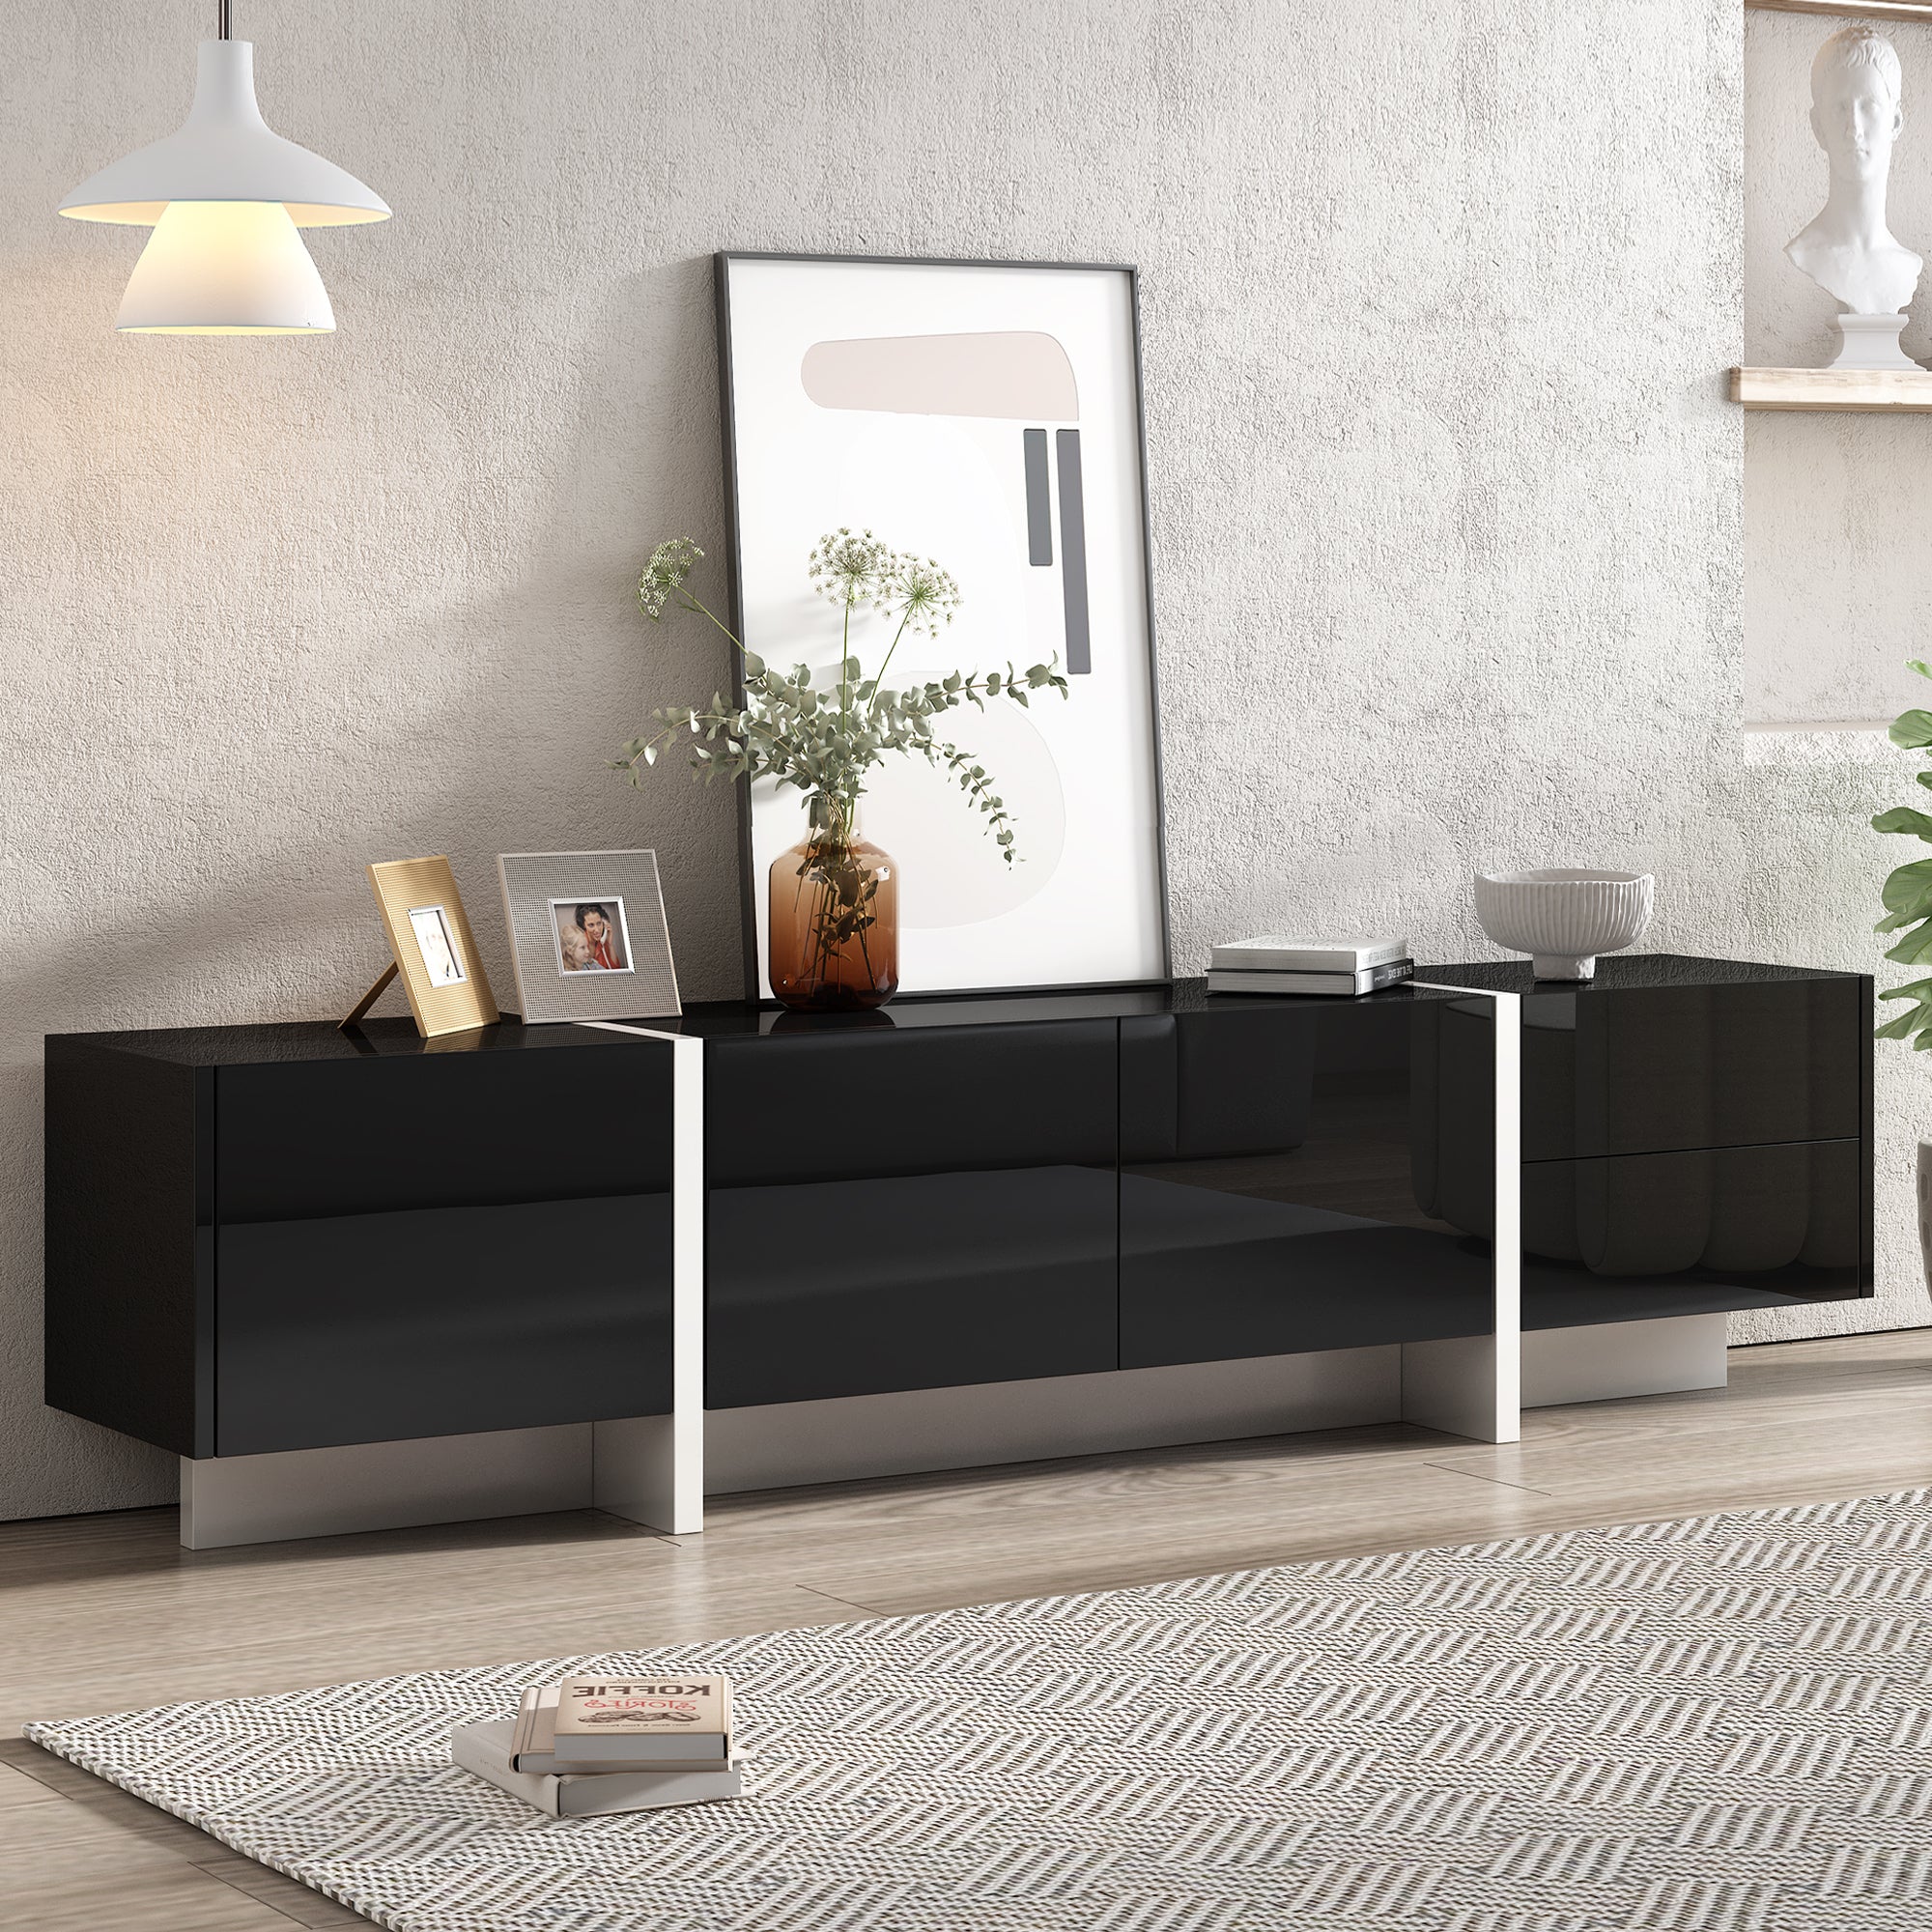 74.80" White & Black Contemporary Rectangle Design TV Stand, Unique Style TV Console Table for TVs Up to 86'', Modern TV Cabinet with High Gloss UV Surface for Living Room.